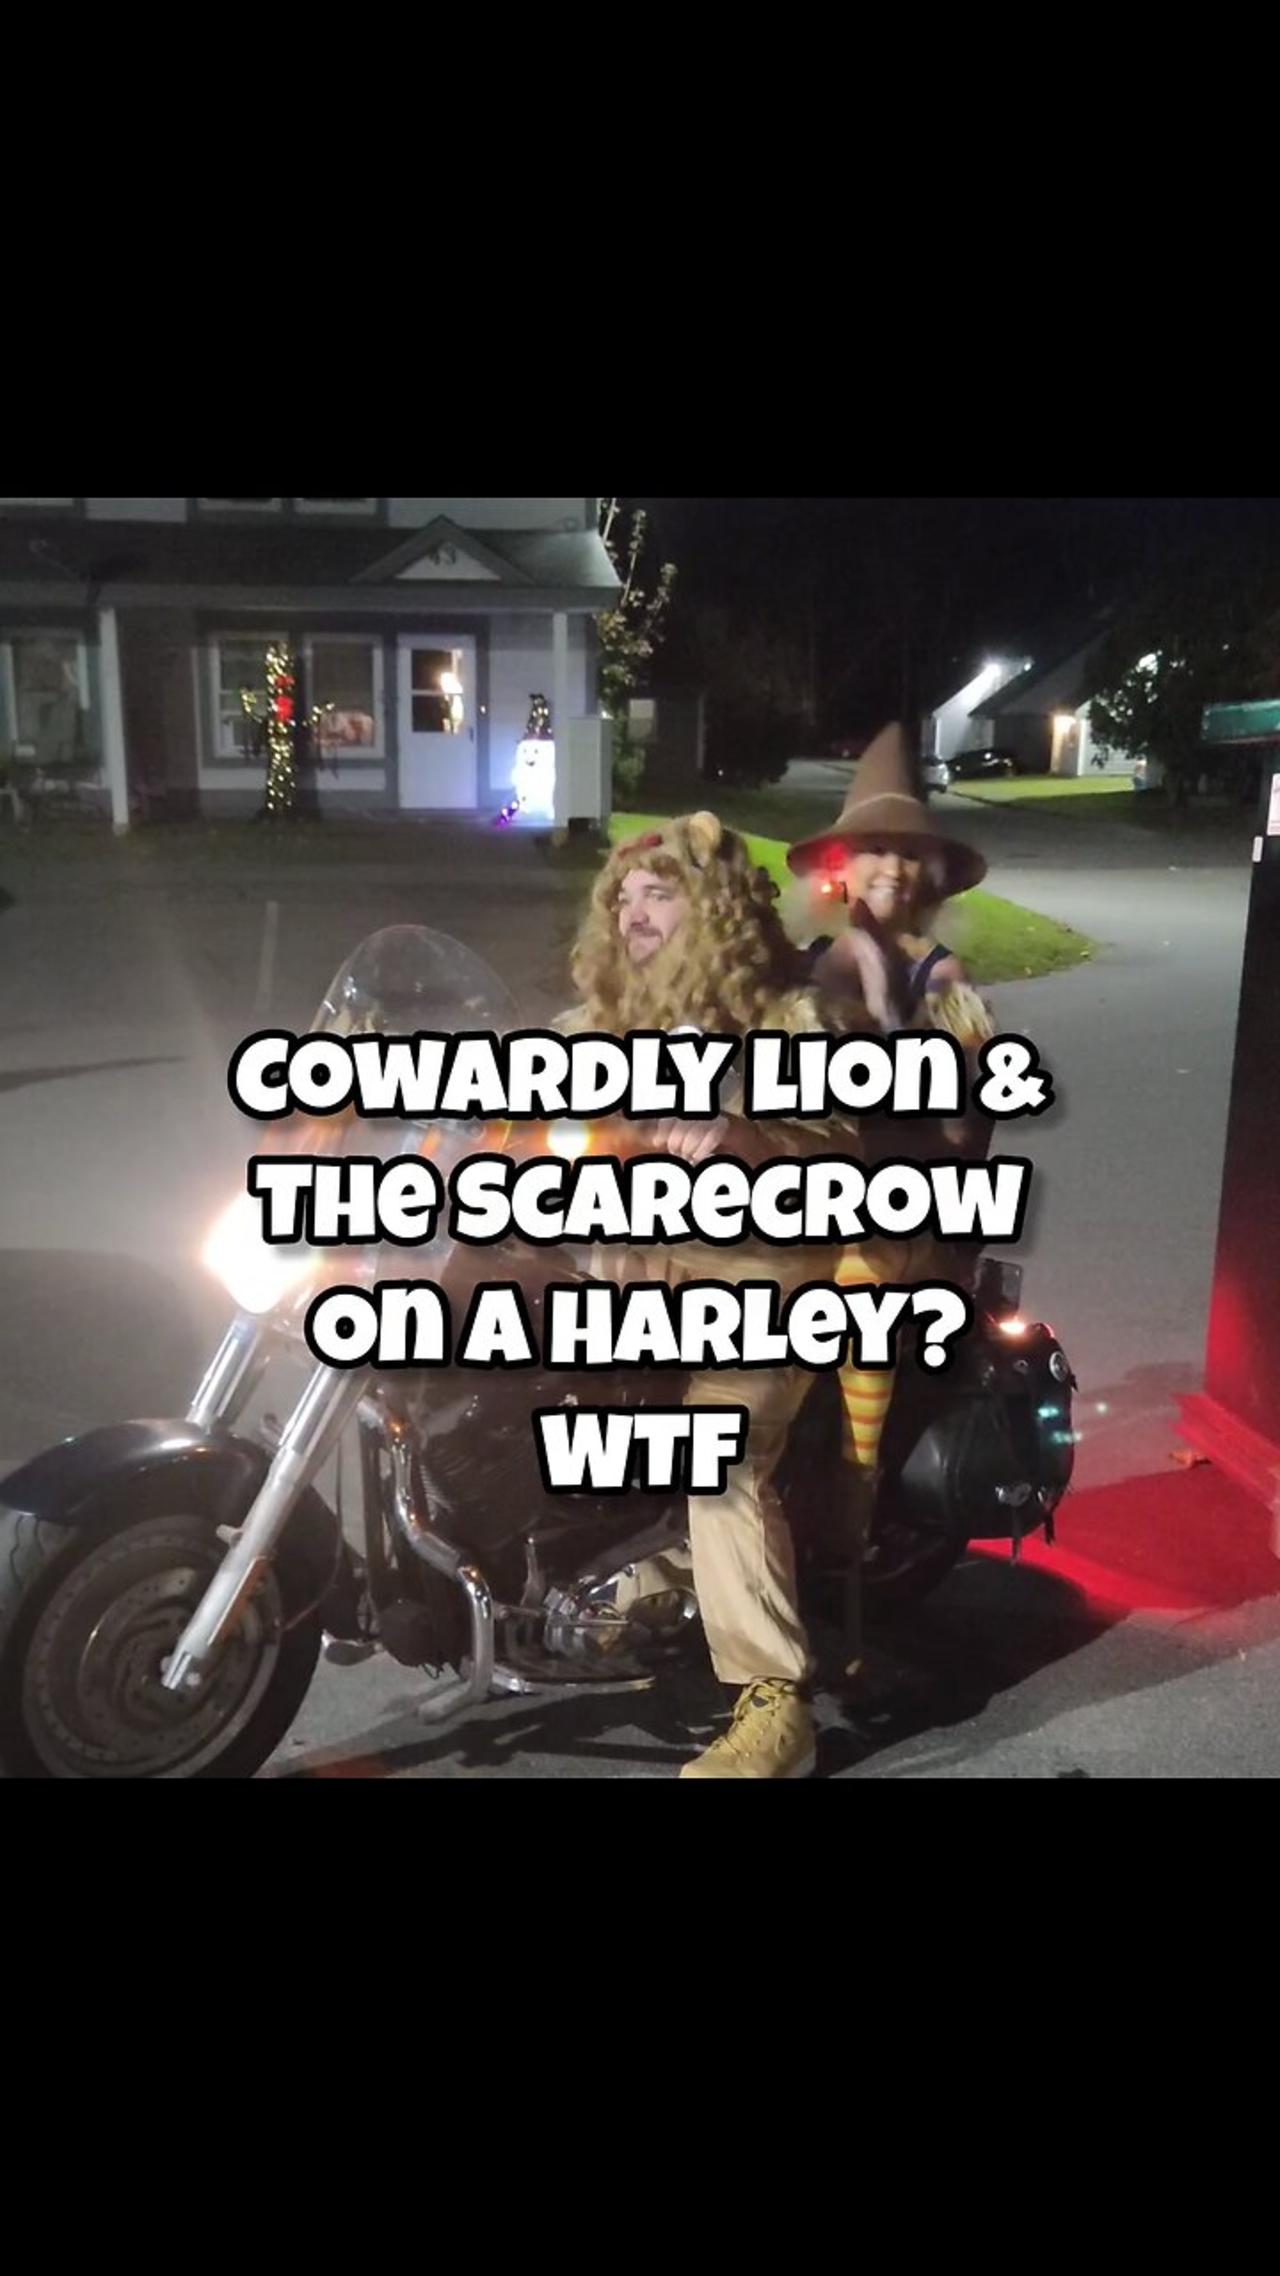 Cowardly lion on a Harley hurts tail